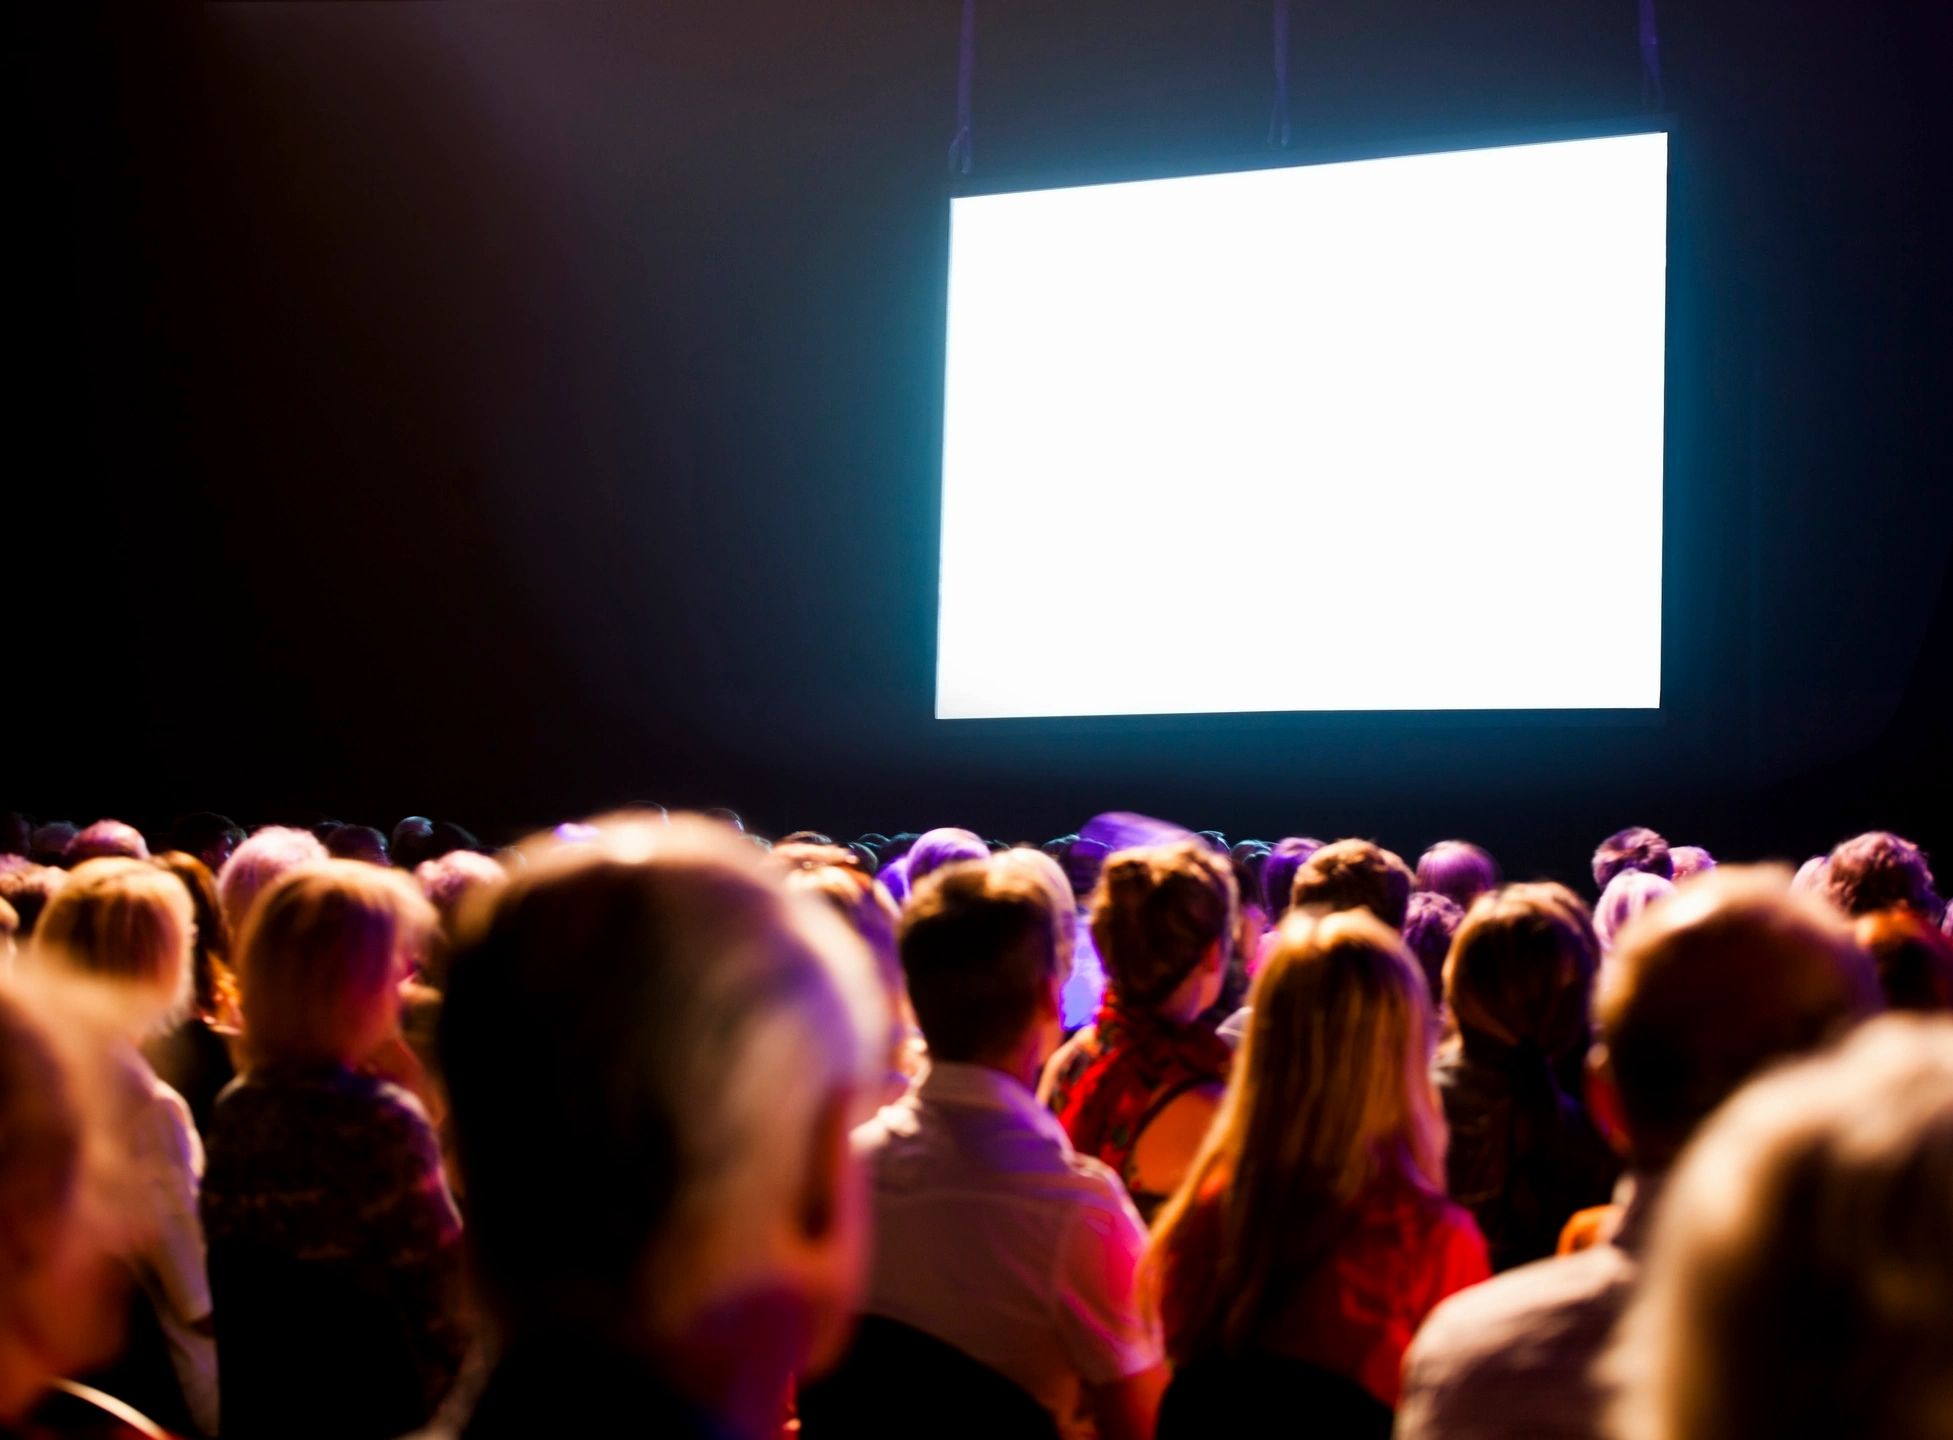 Audience in darkened movie theater looking at bright white screen on the wall